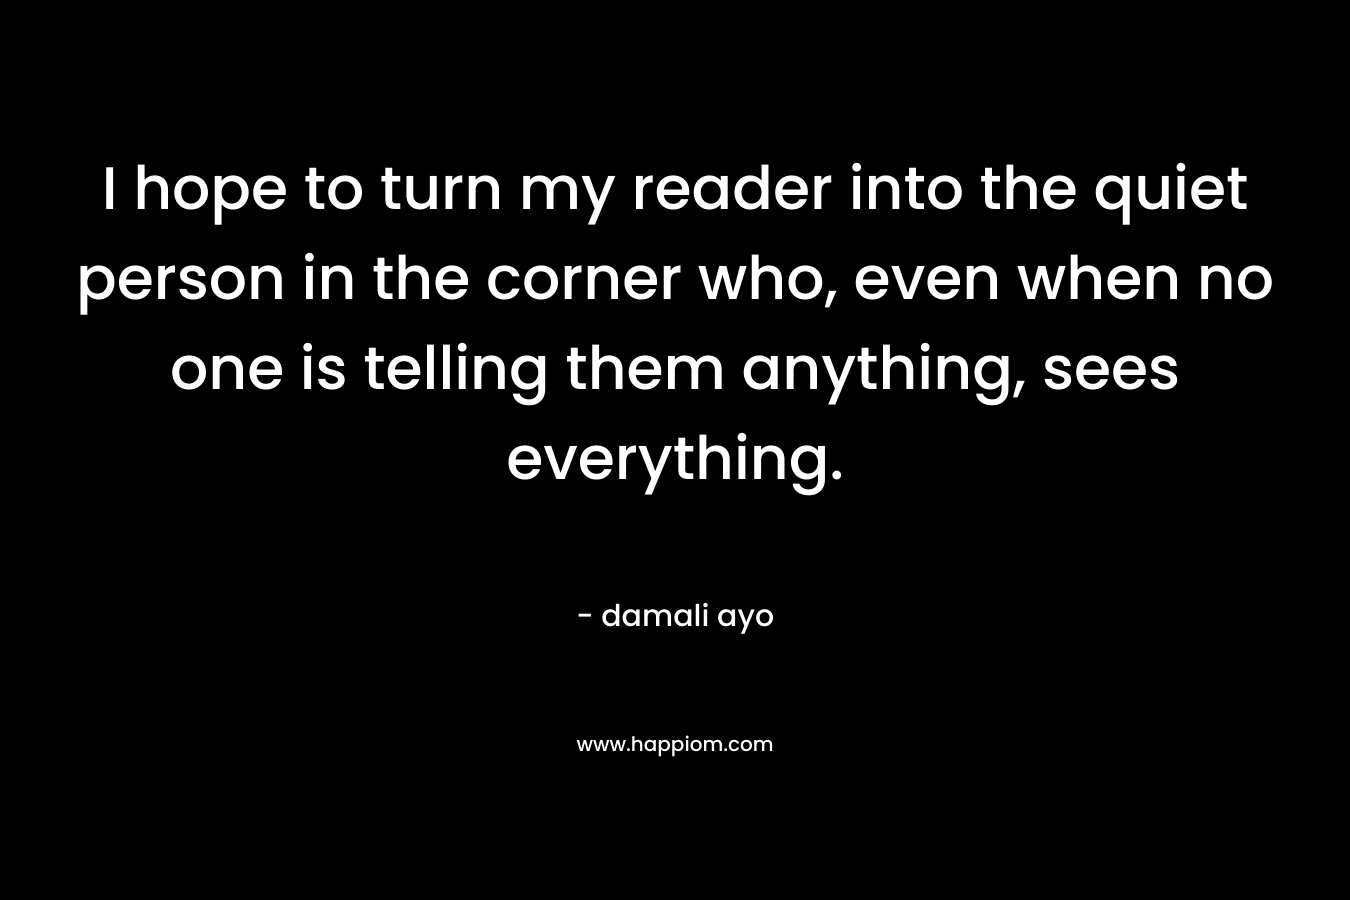 I hope to turn my reader into the quiet person in the corner who, even when no one is telling them anything, sees everything.